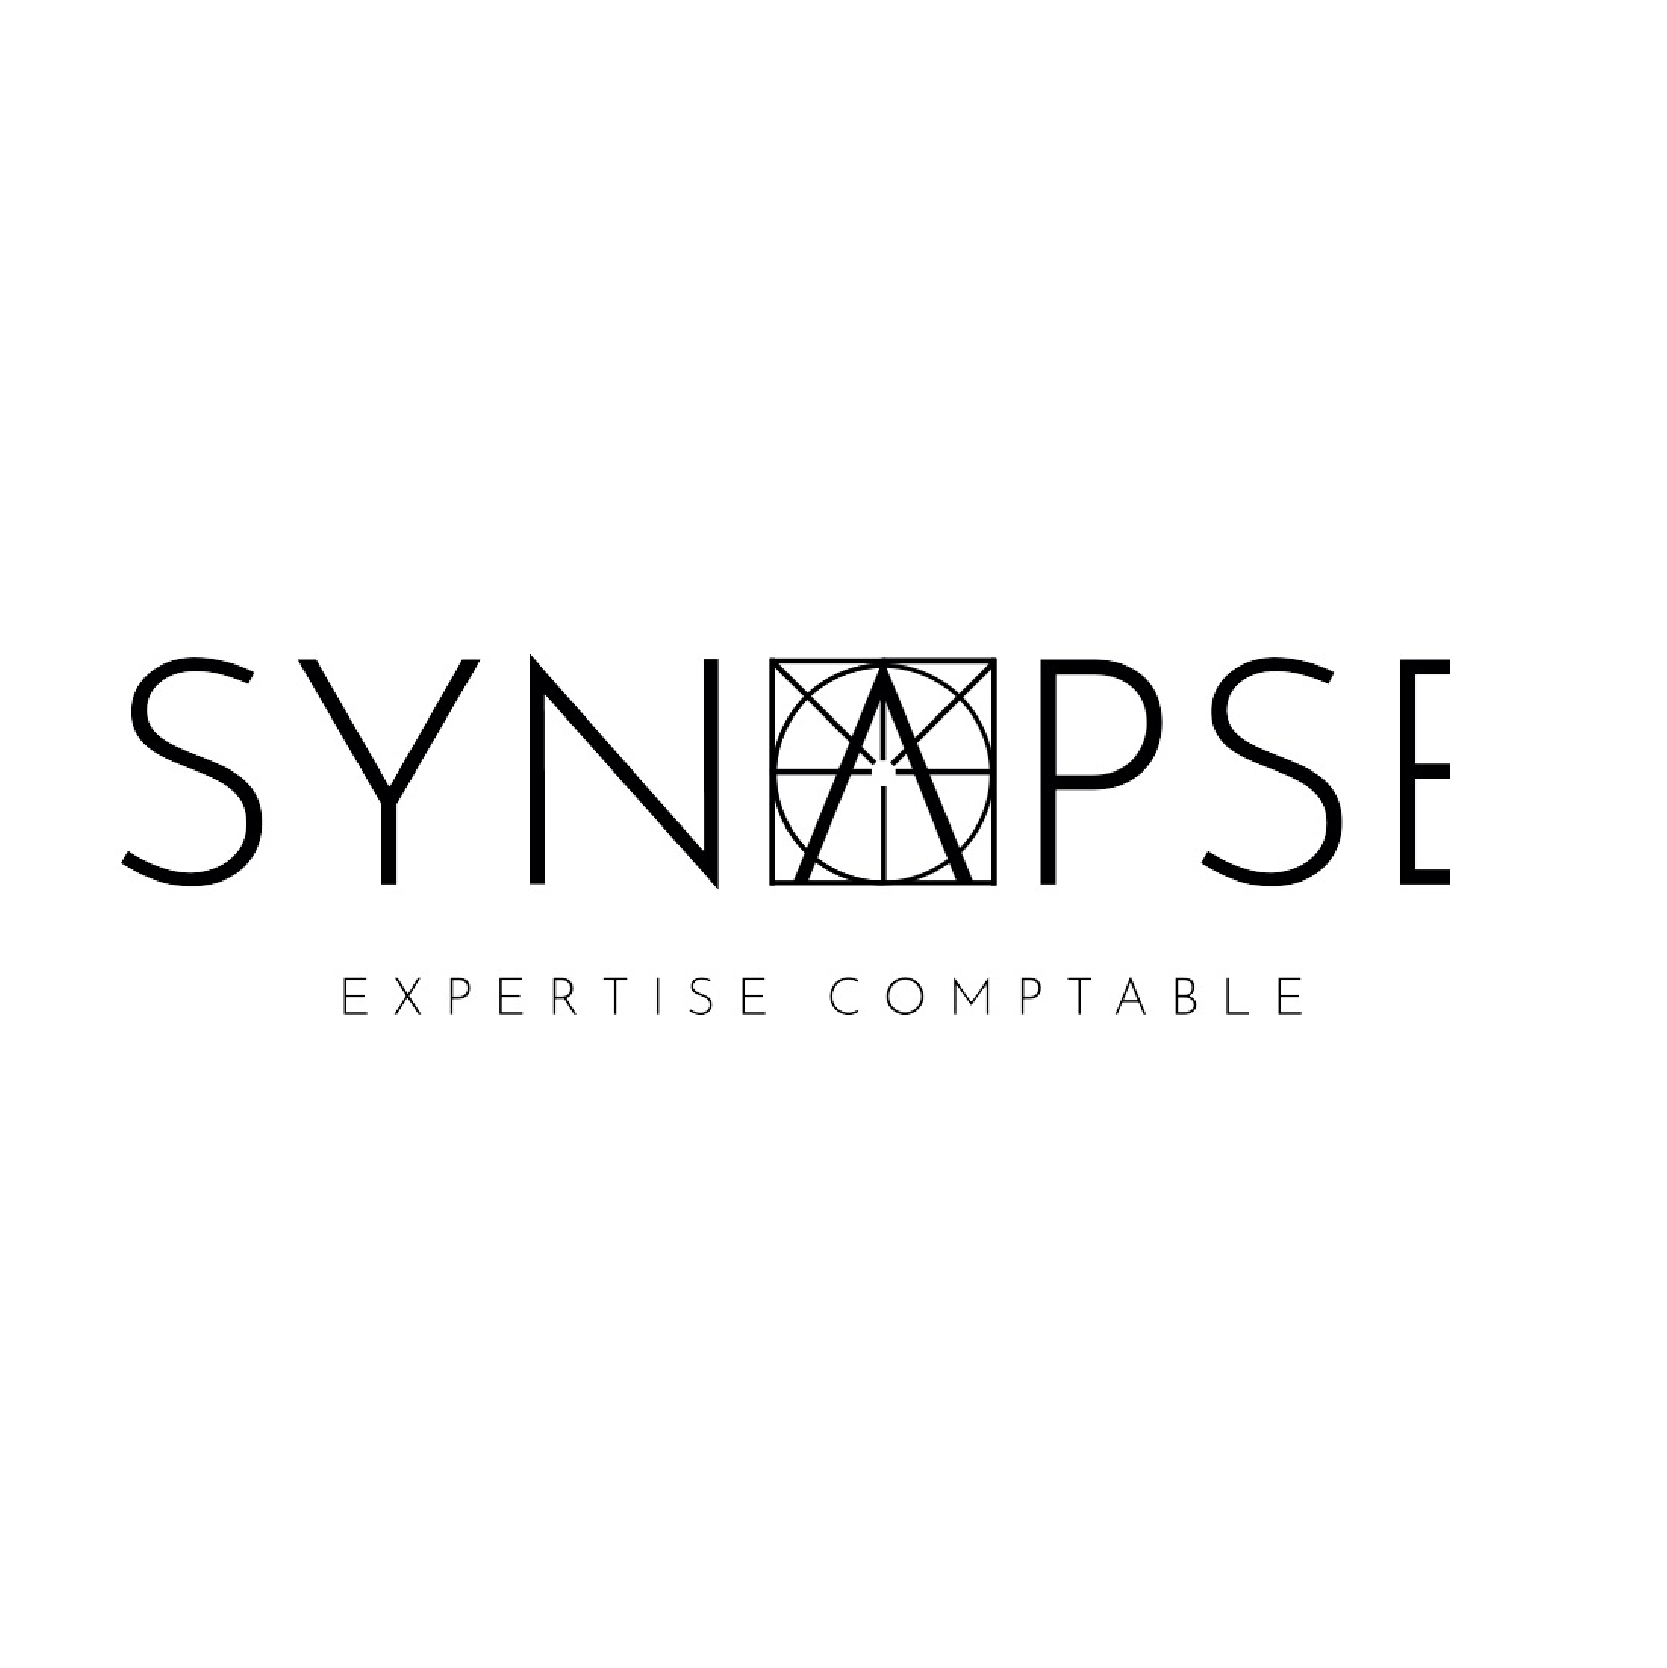 Cabinet-Synapse-Expert-Comptable